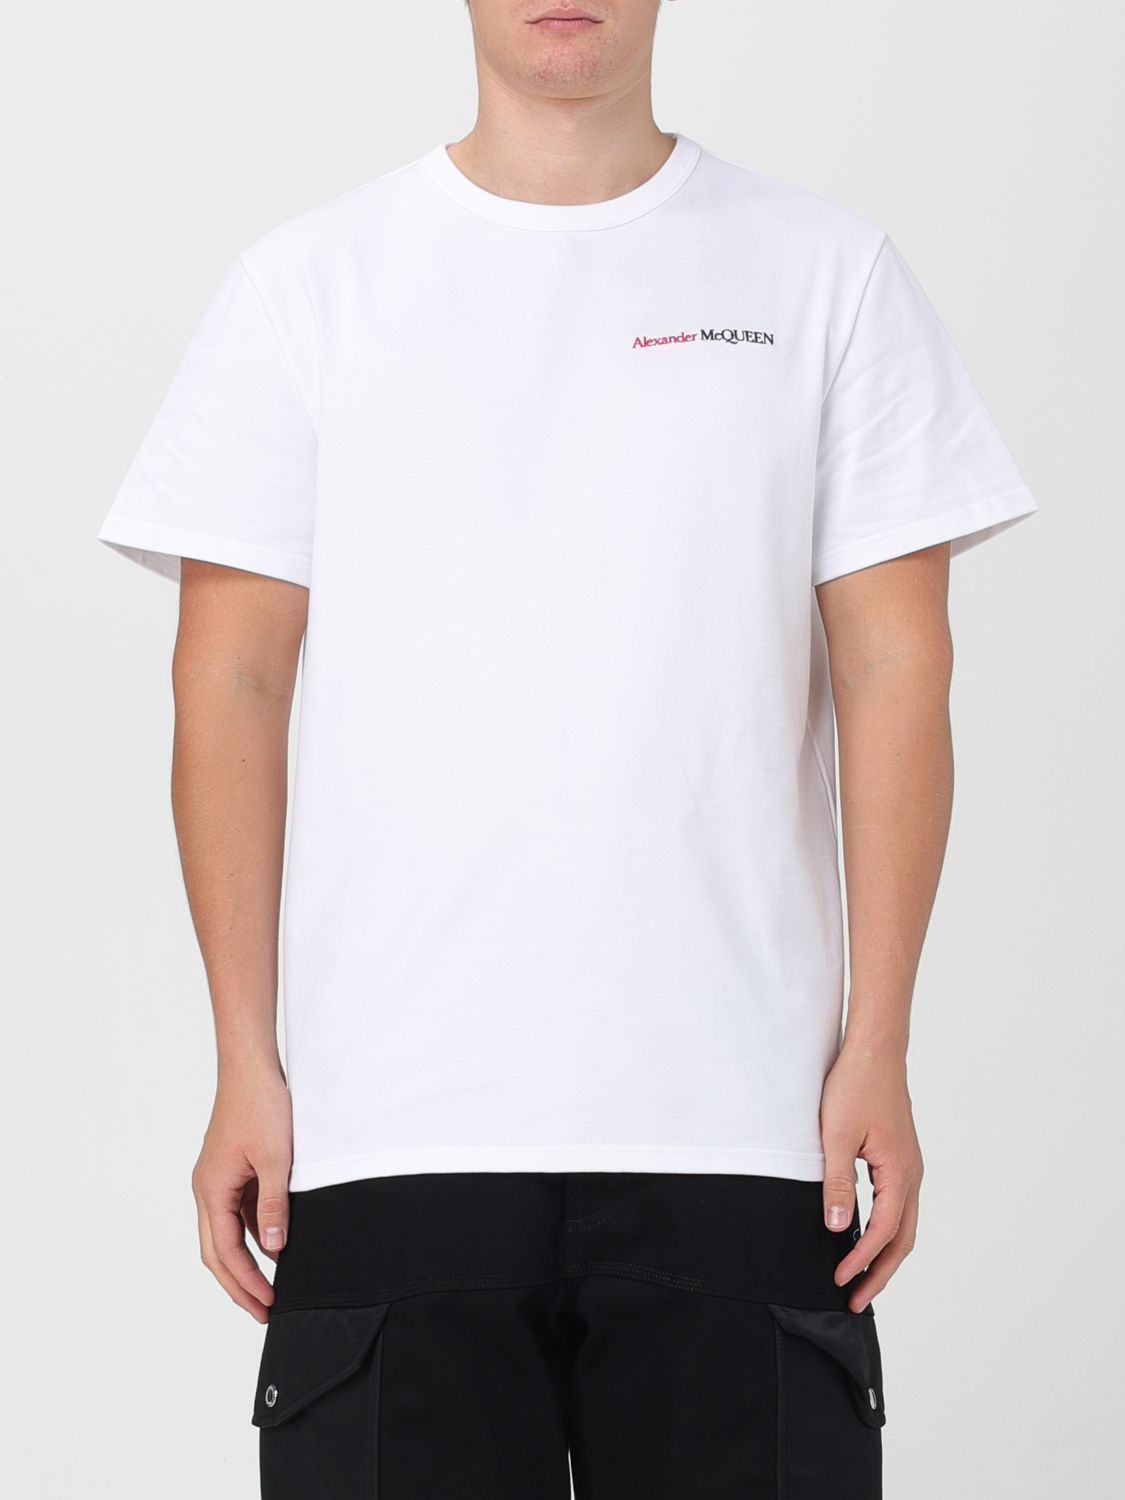 Alexander Mcqueen T-shirt With Mini Logo In White